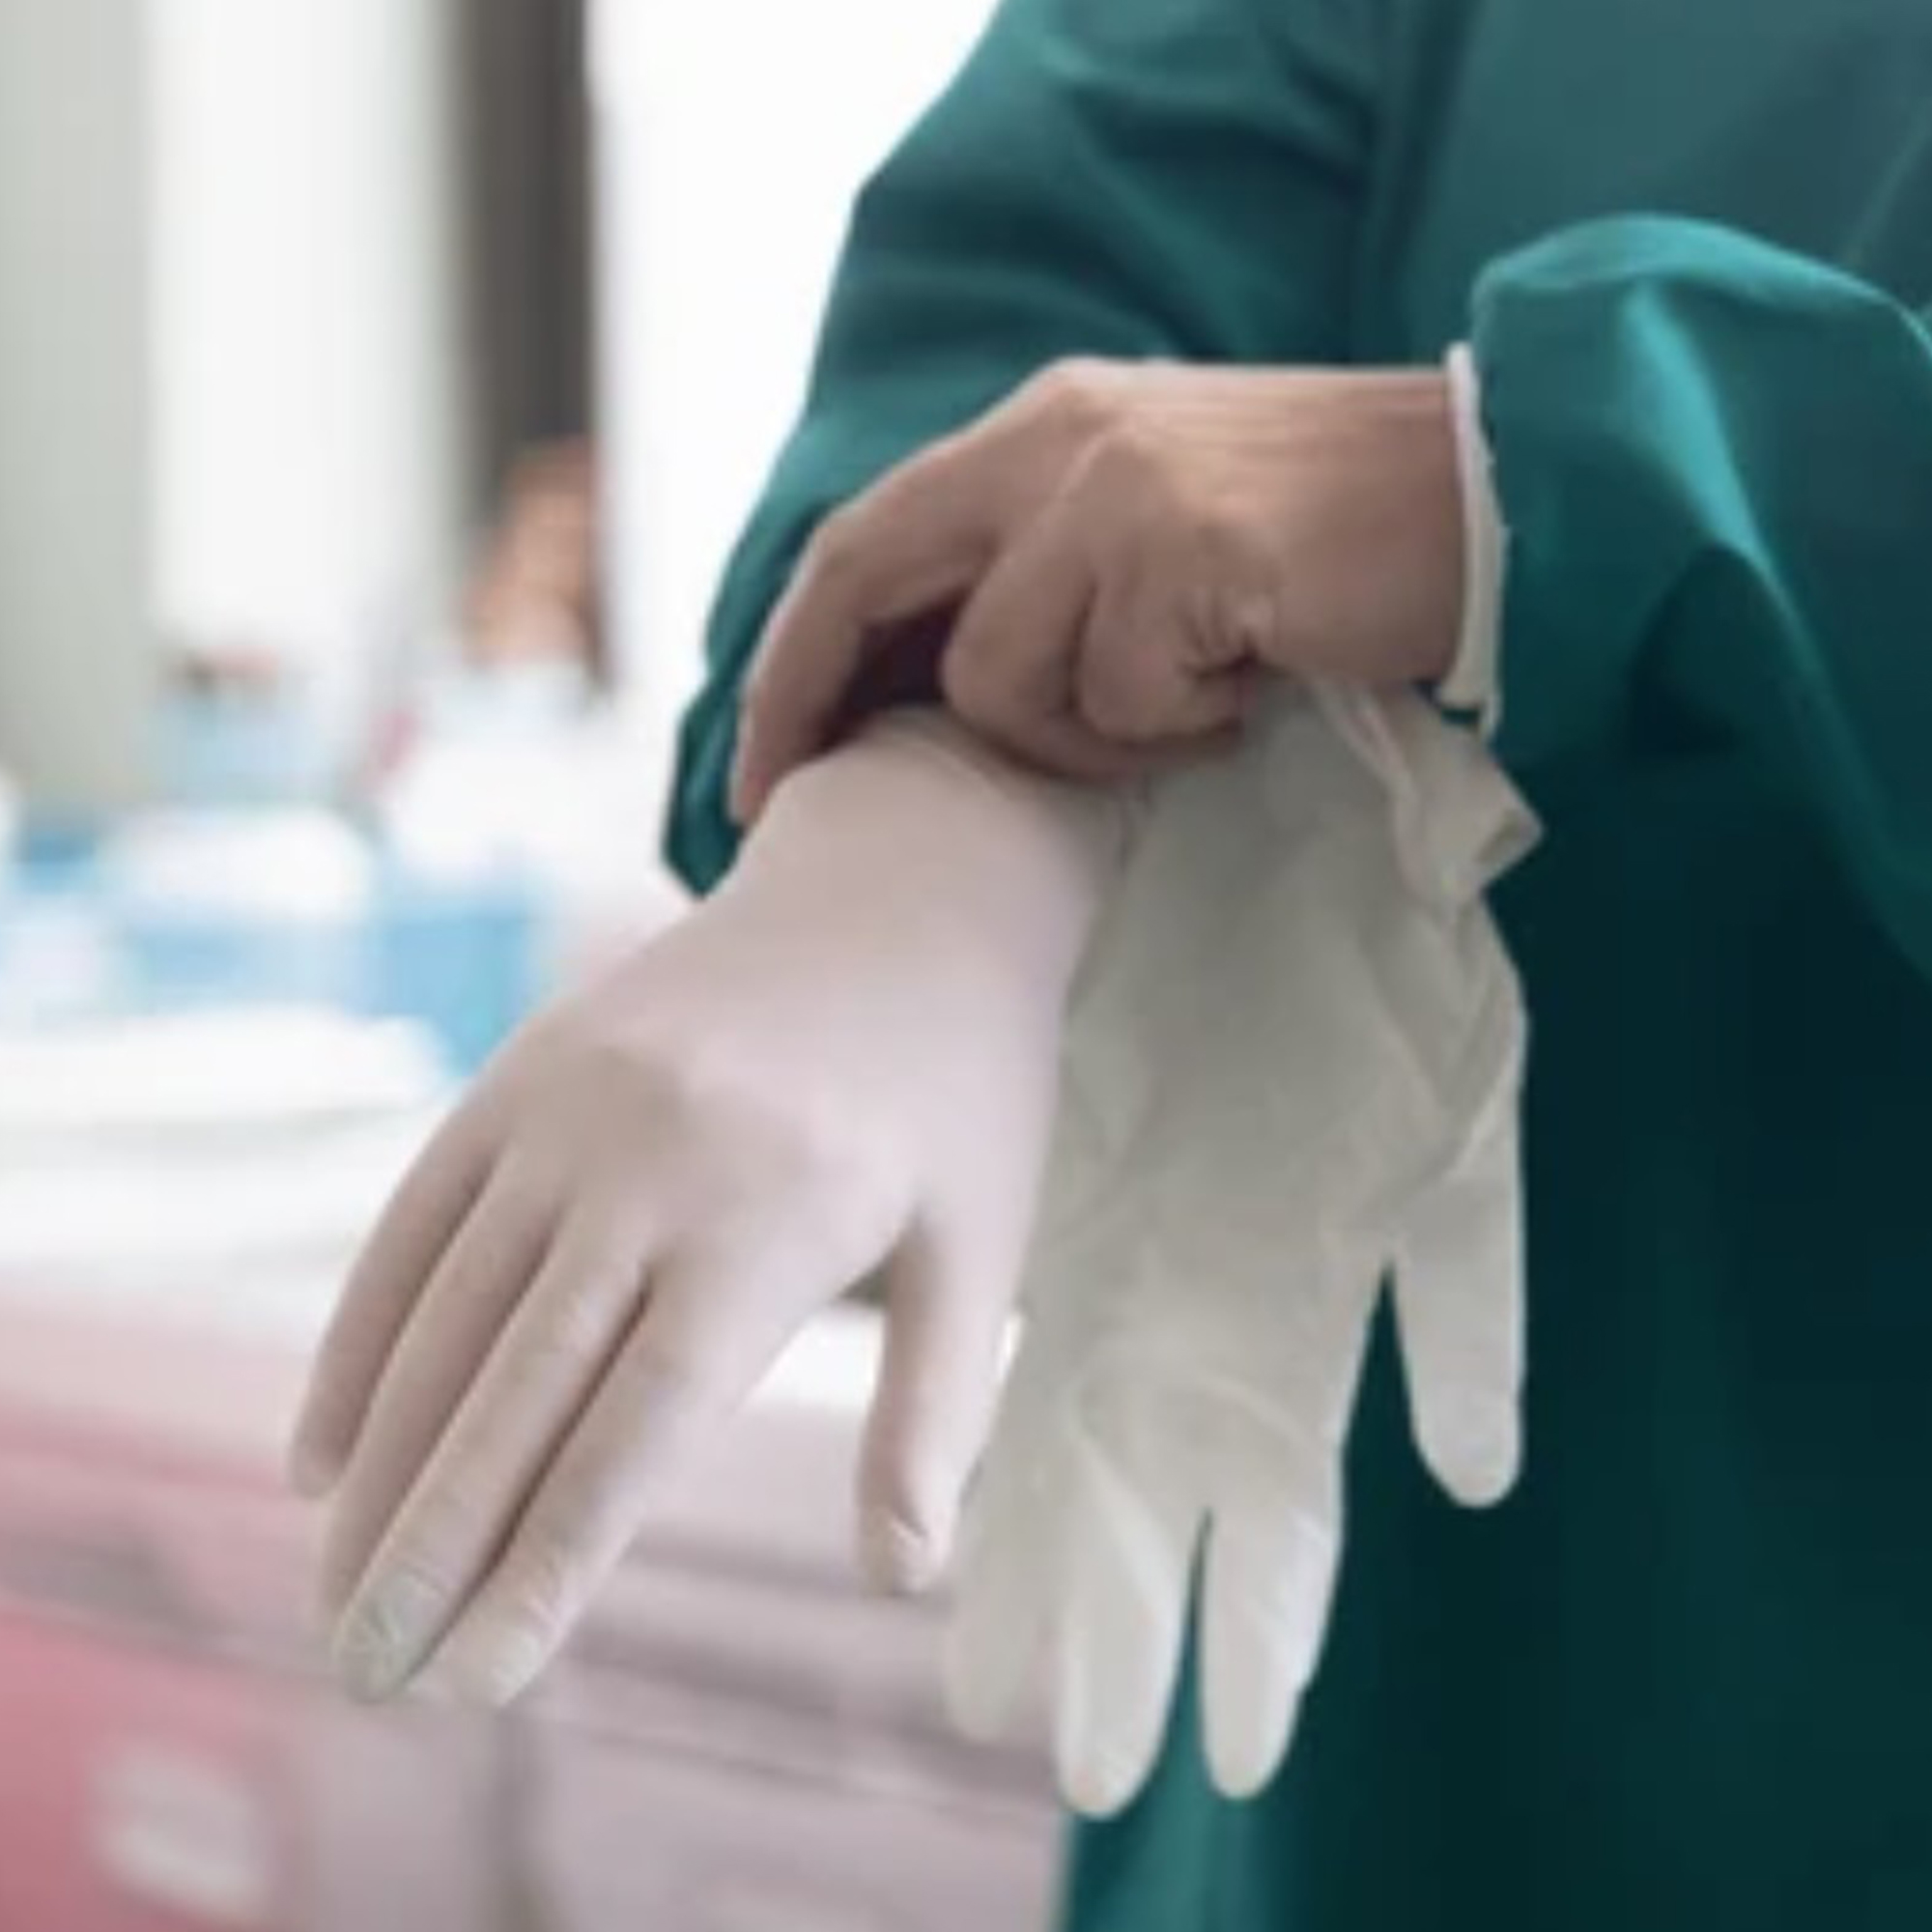 Hygiene and Safety/HYGIENE & PROTECTION EXAMINATION GLOVES/Hygiene & Protection Sterile Gloves